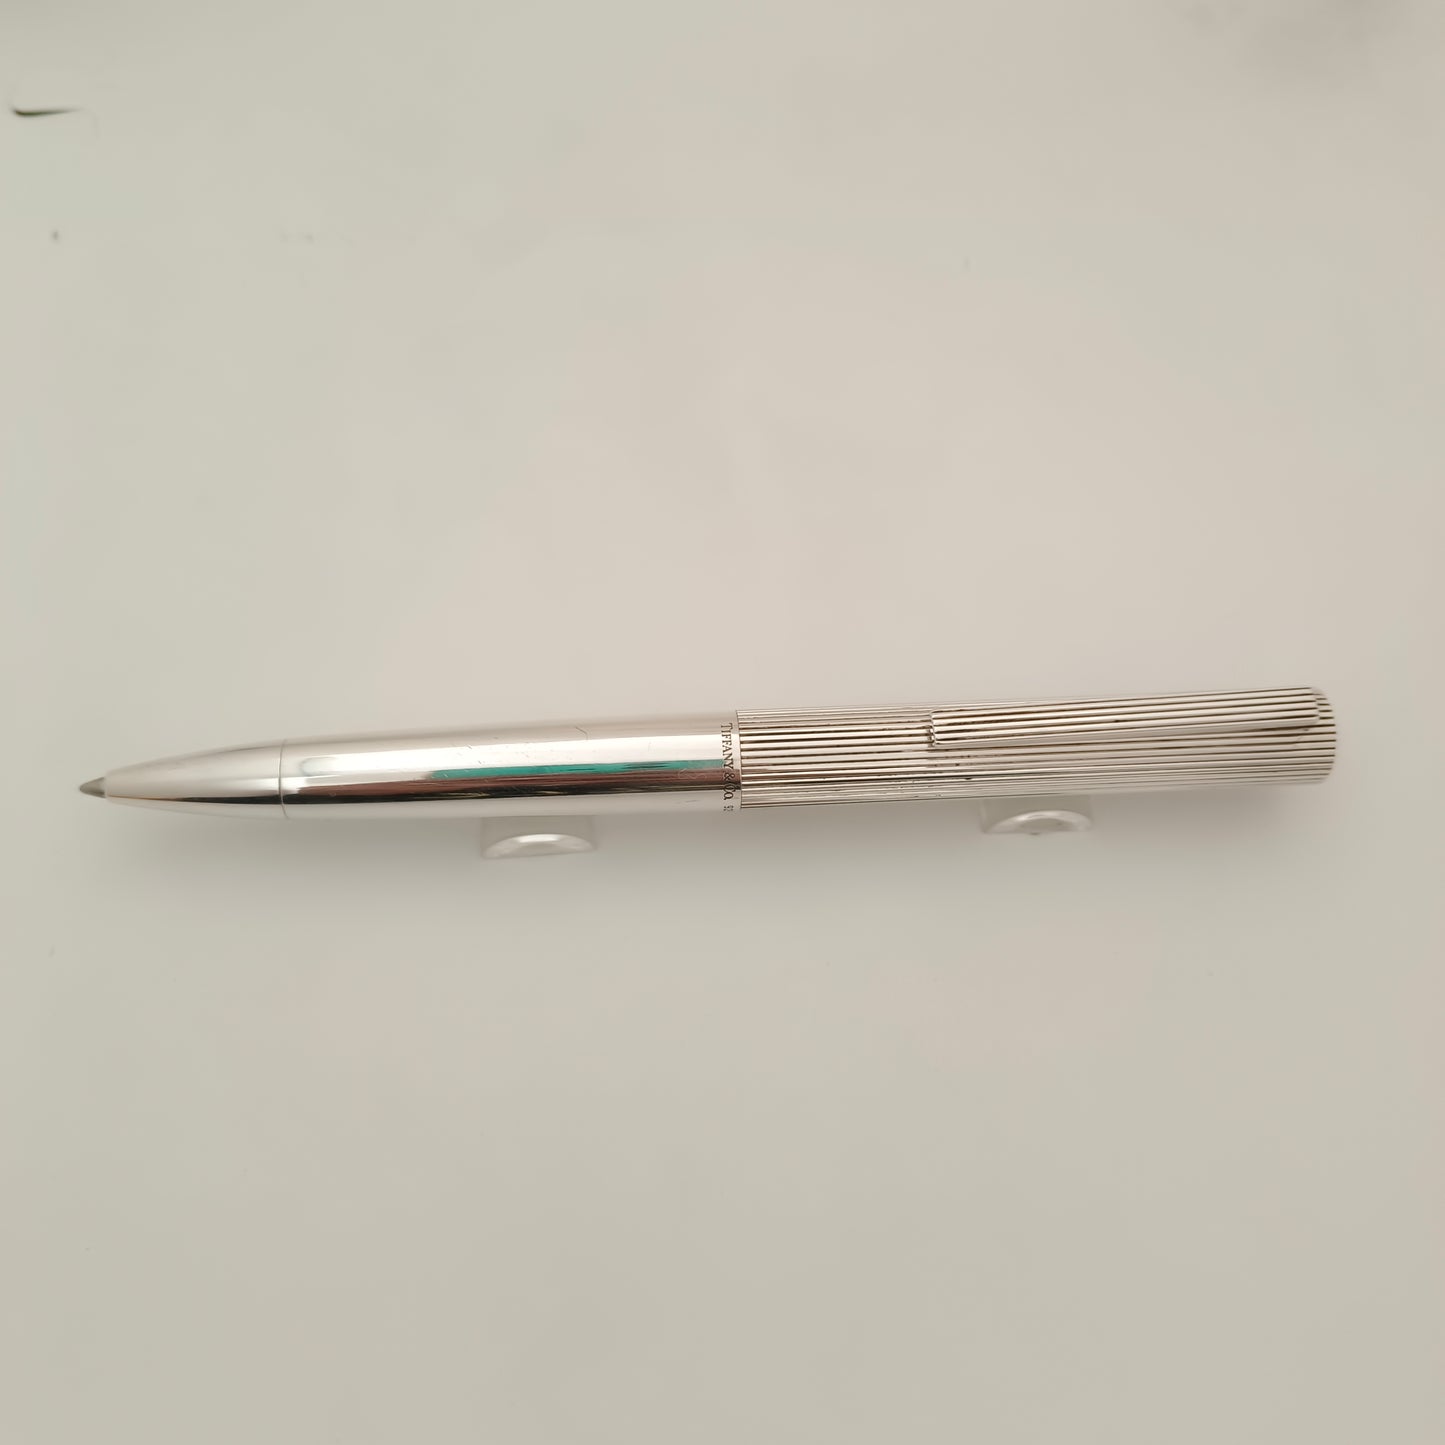 Vintage Tiffany & Co Ballpoint Pen Sterling Silver, Pins Stripe Design Made in Germany